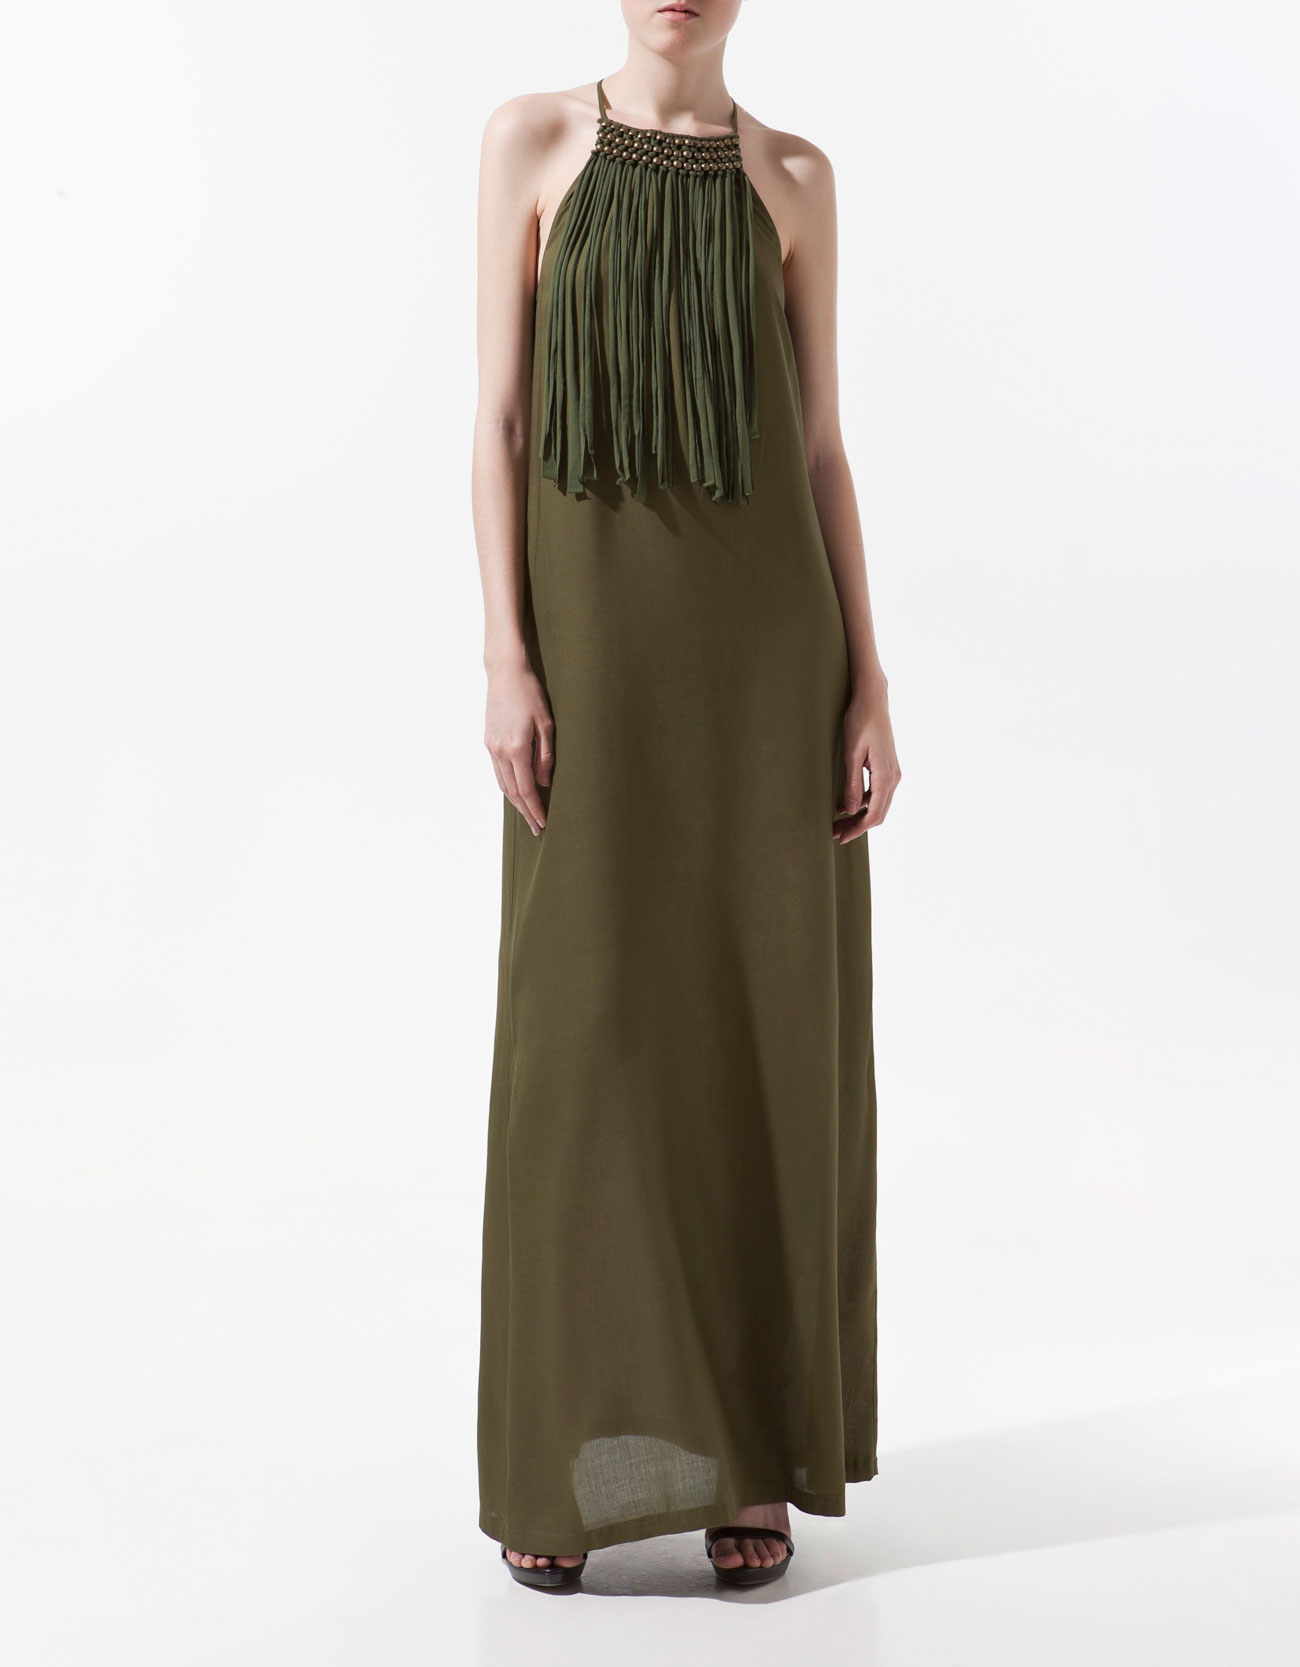 Zara Long Dress with Appliqué On The Collar in Natural | Lyst